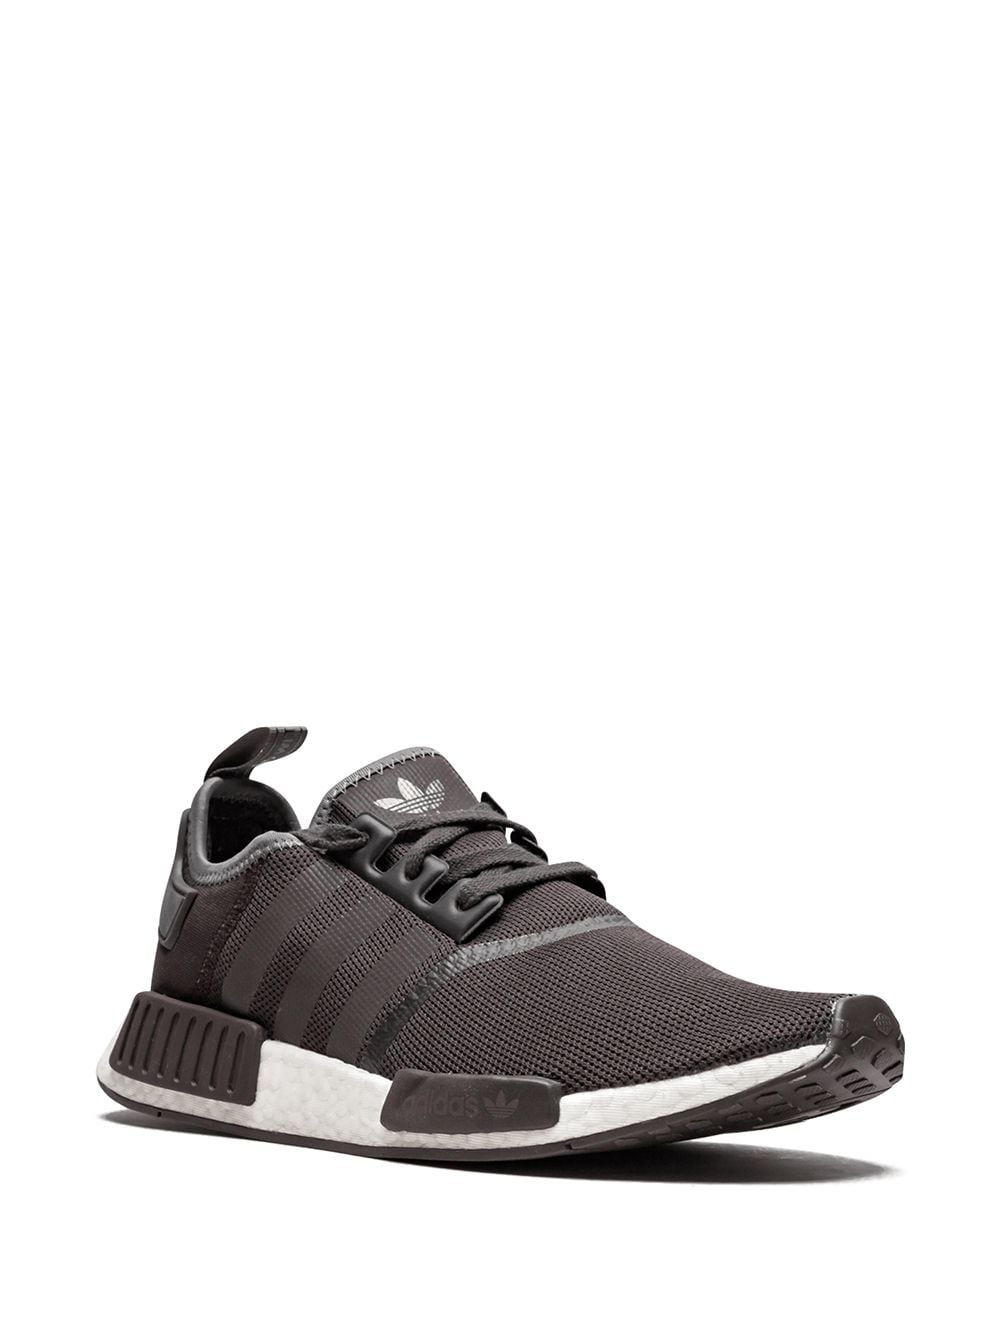 Image 2 of adidas NMD_R1 low-top sneakers